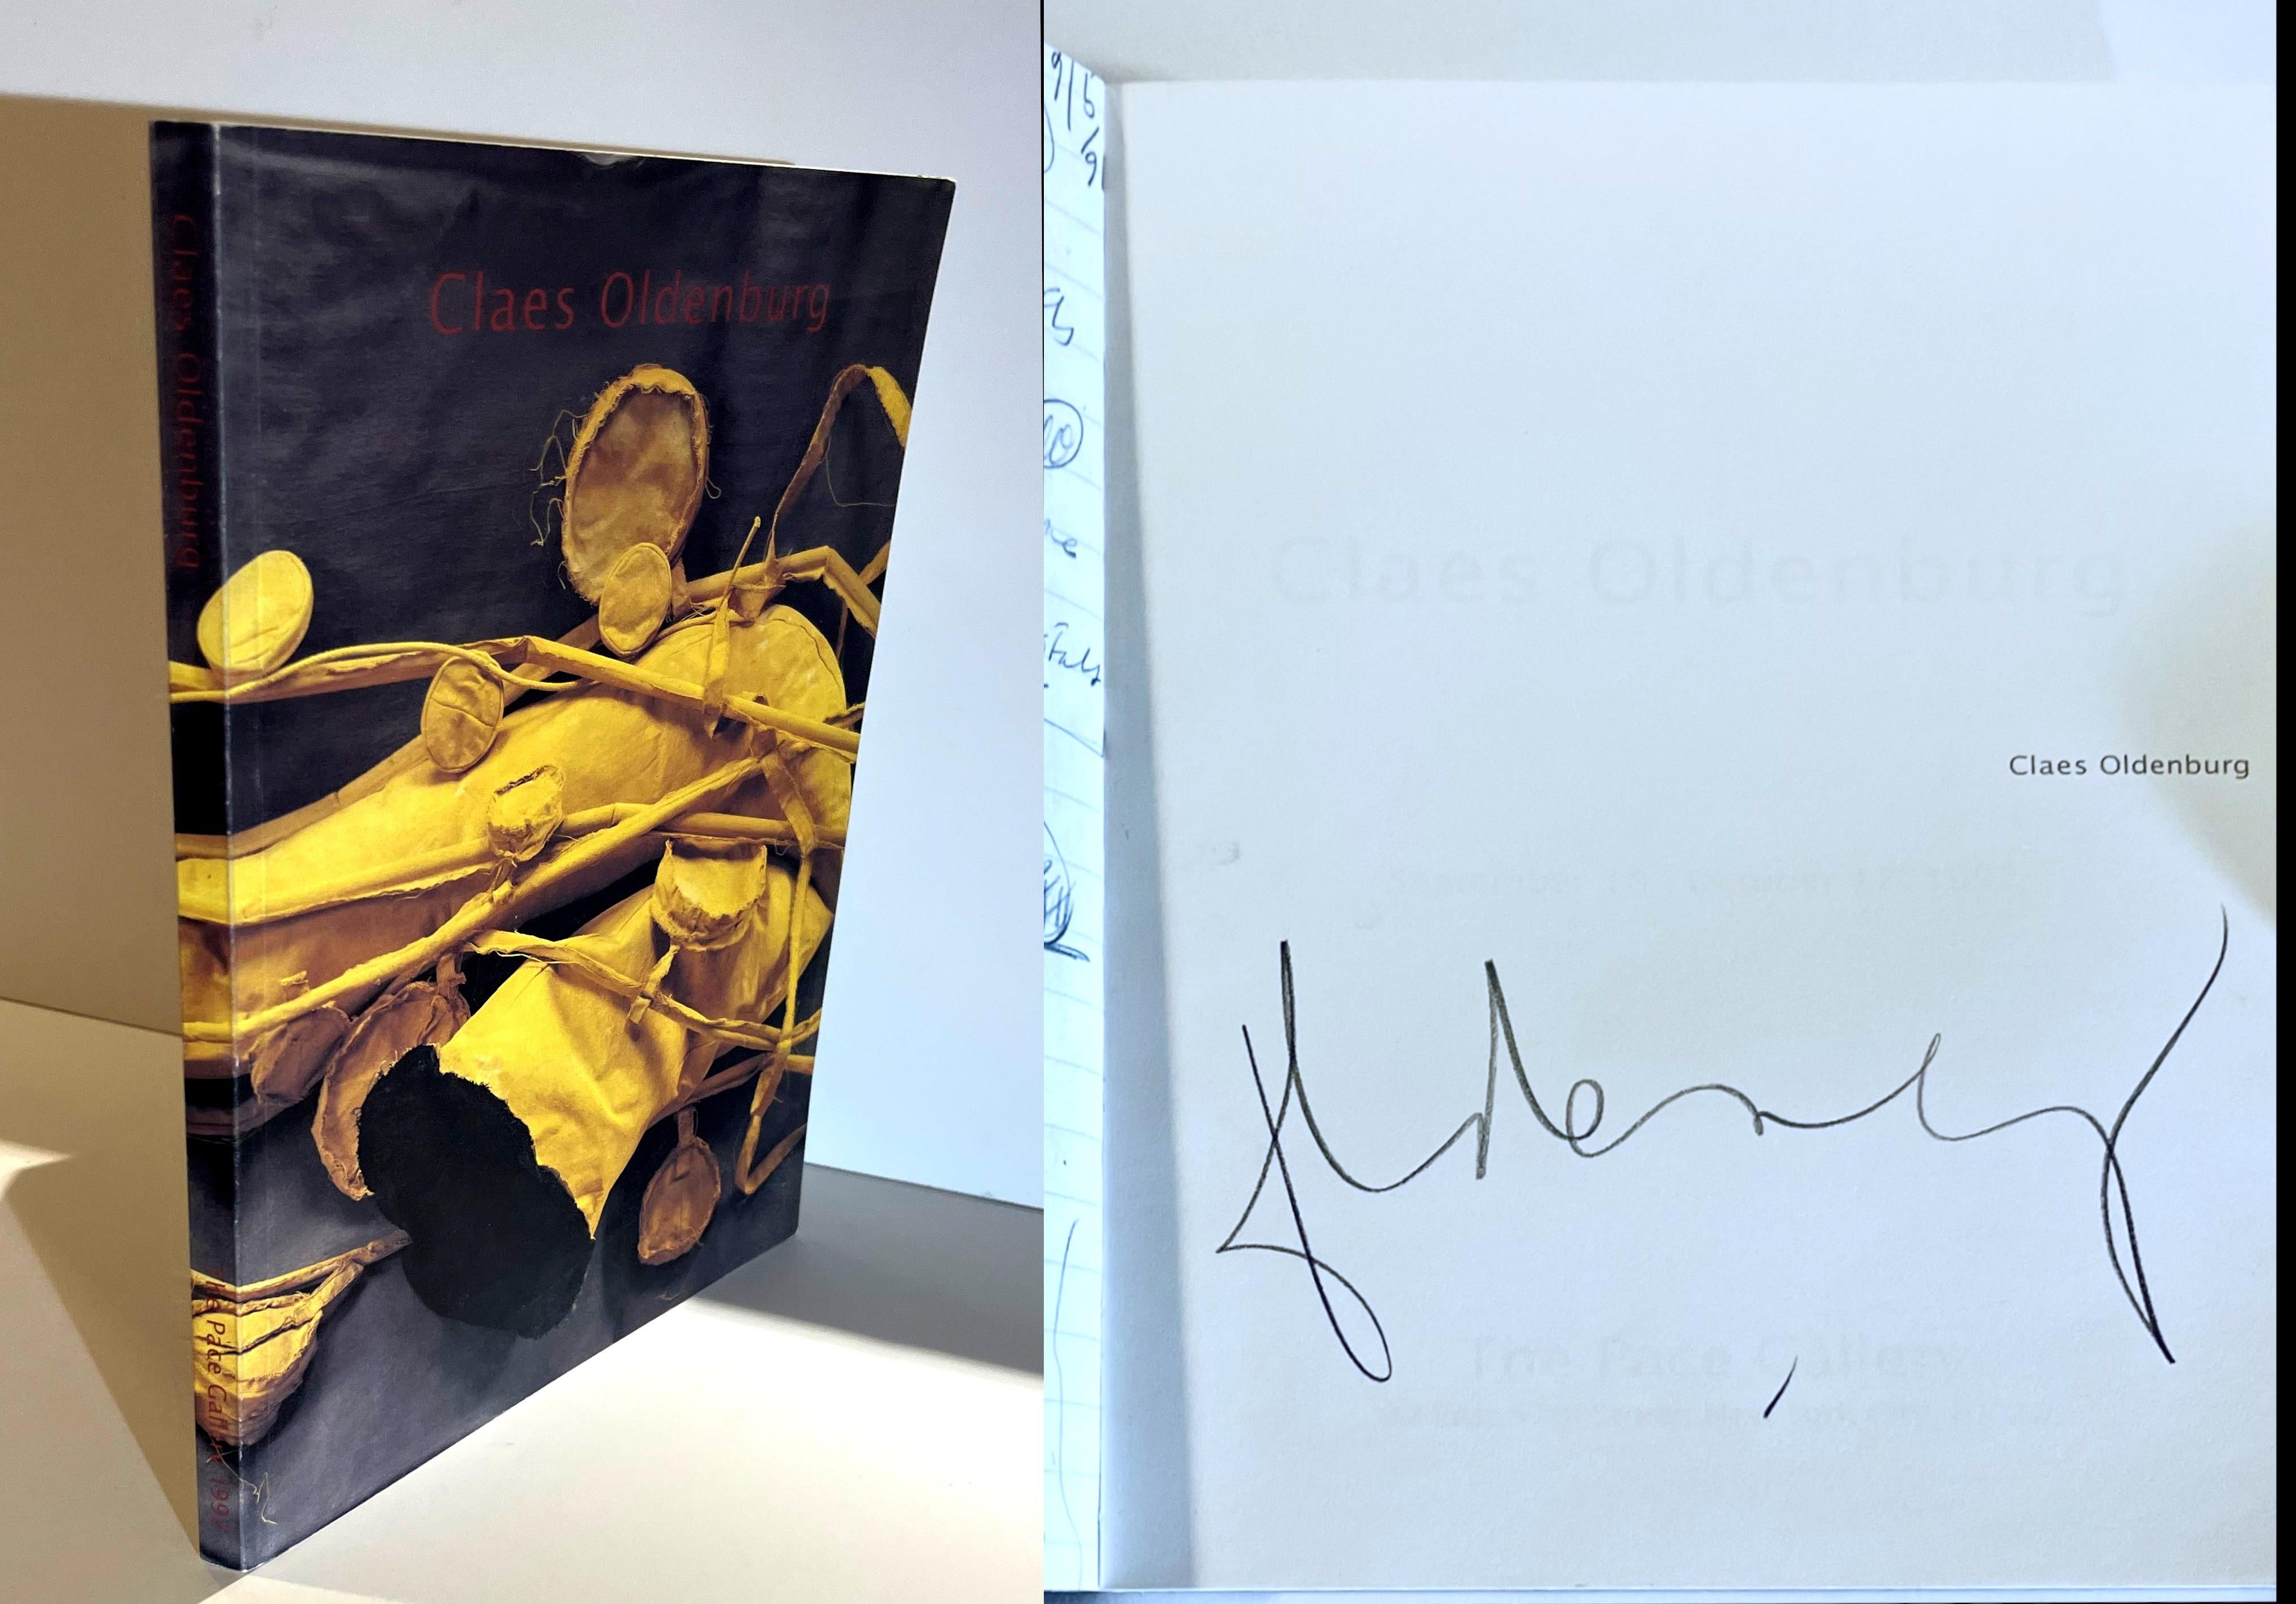 Claes Oldenburg (Hand signed by Claes Oldenburg), 1992
Softback catalogue with stiff wraps (hand signed by Claes Oldenburg
hand signed by Claes Oldenburg on the half title page
11 3/4 × 9 × 3/4 inches
(note: the main image has a shadow on the